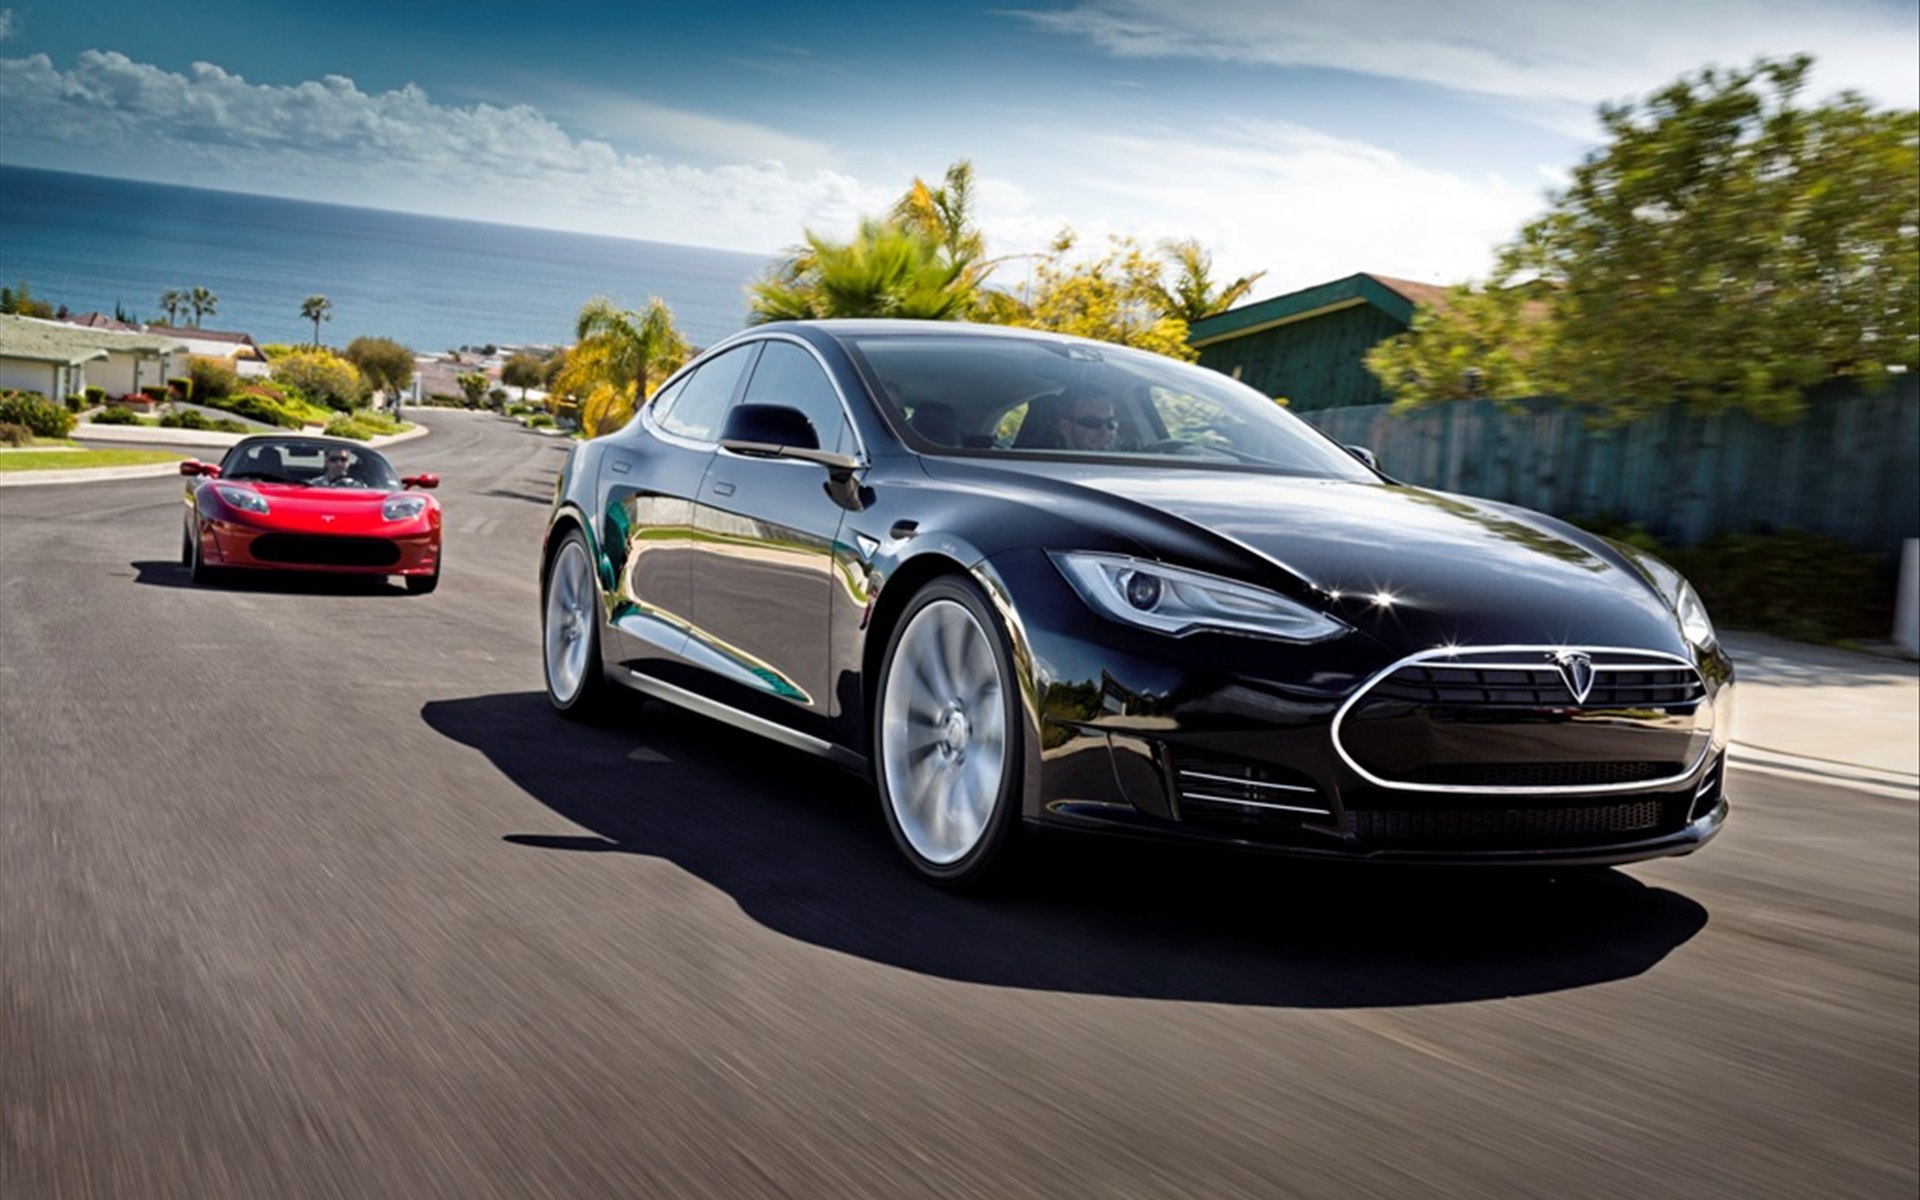 Download Tesla wallpapers for mobile phone free Tesla HD pictures